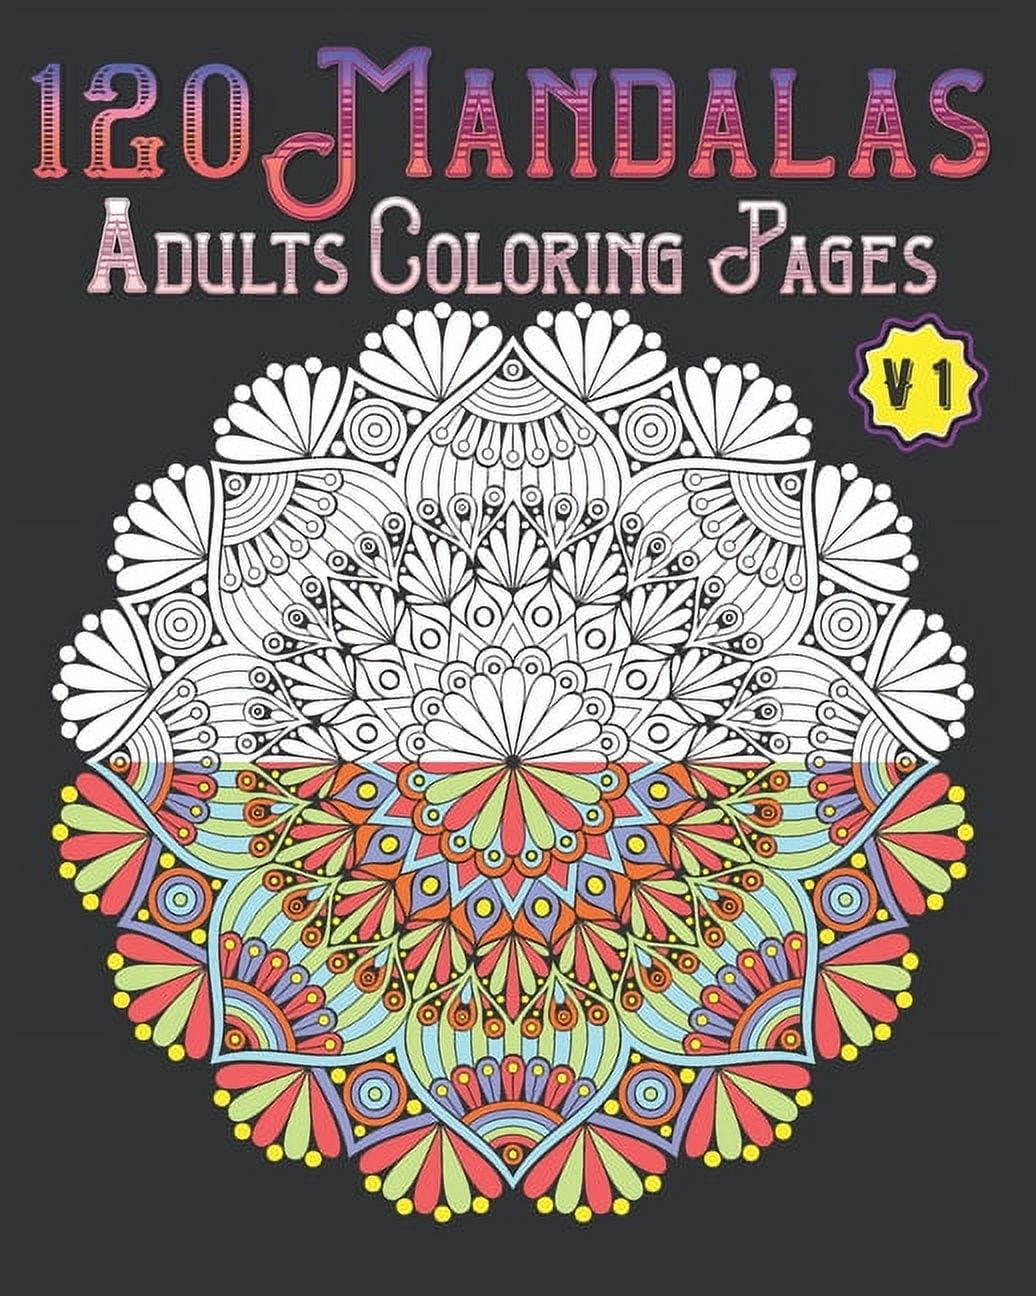 Mandala Coloring Book for Teens and Young Adults (6x9 Coloring Book /  Activity Book) (Mandala Coloring Books #1) (Paperback)